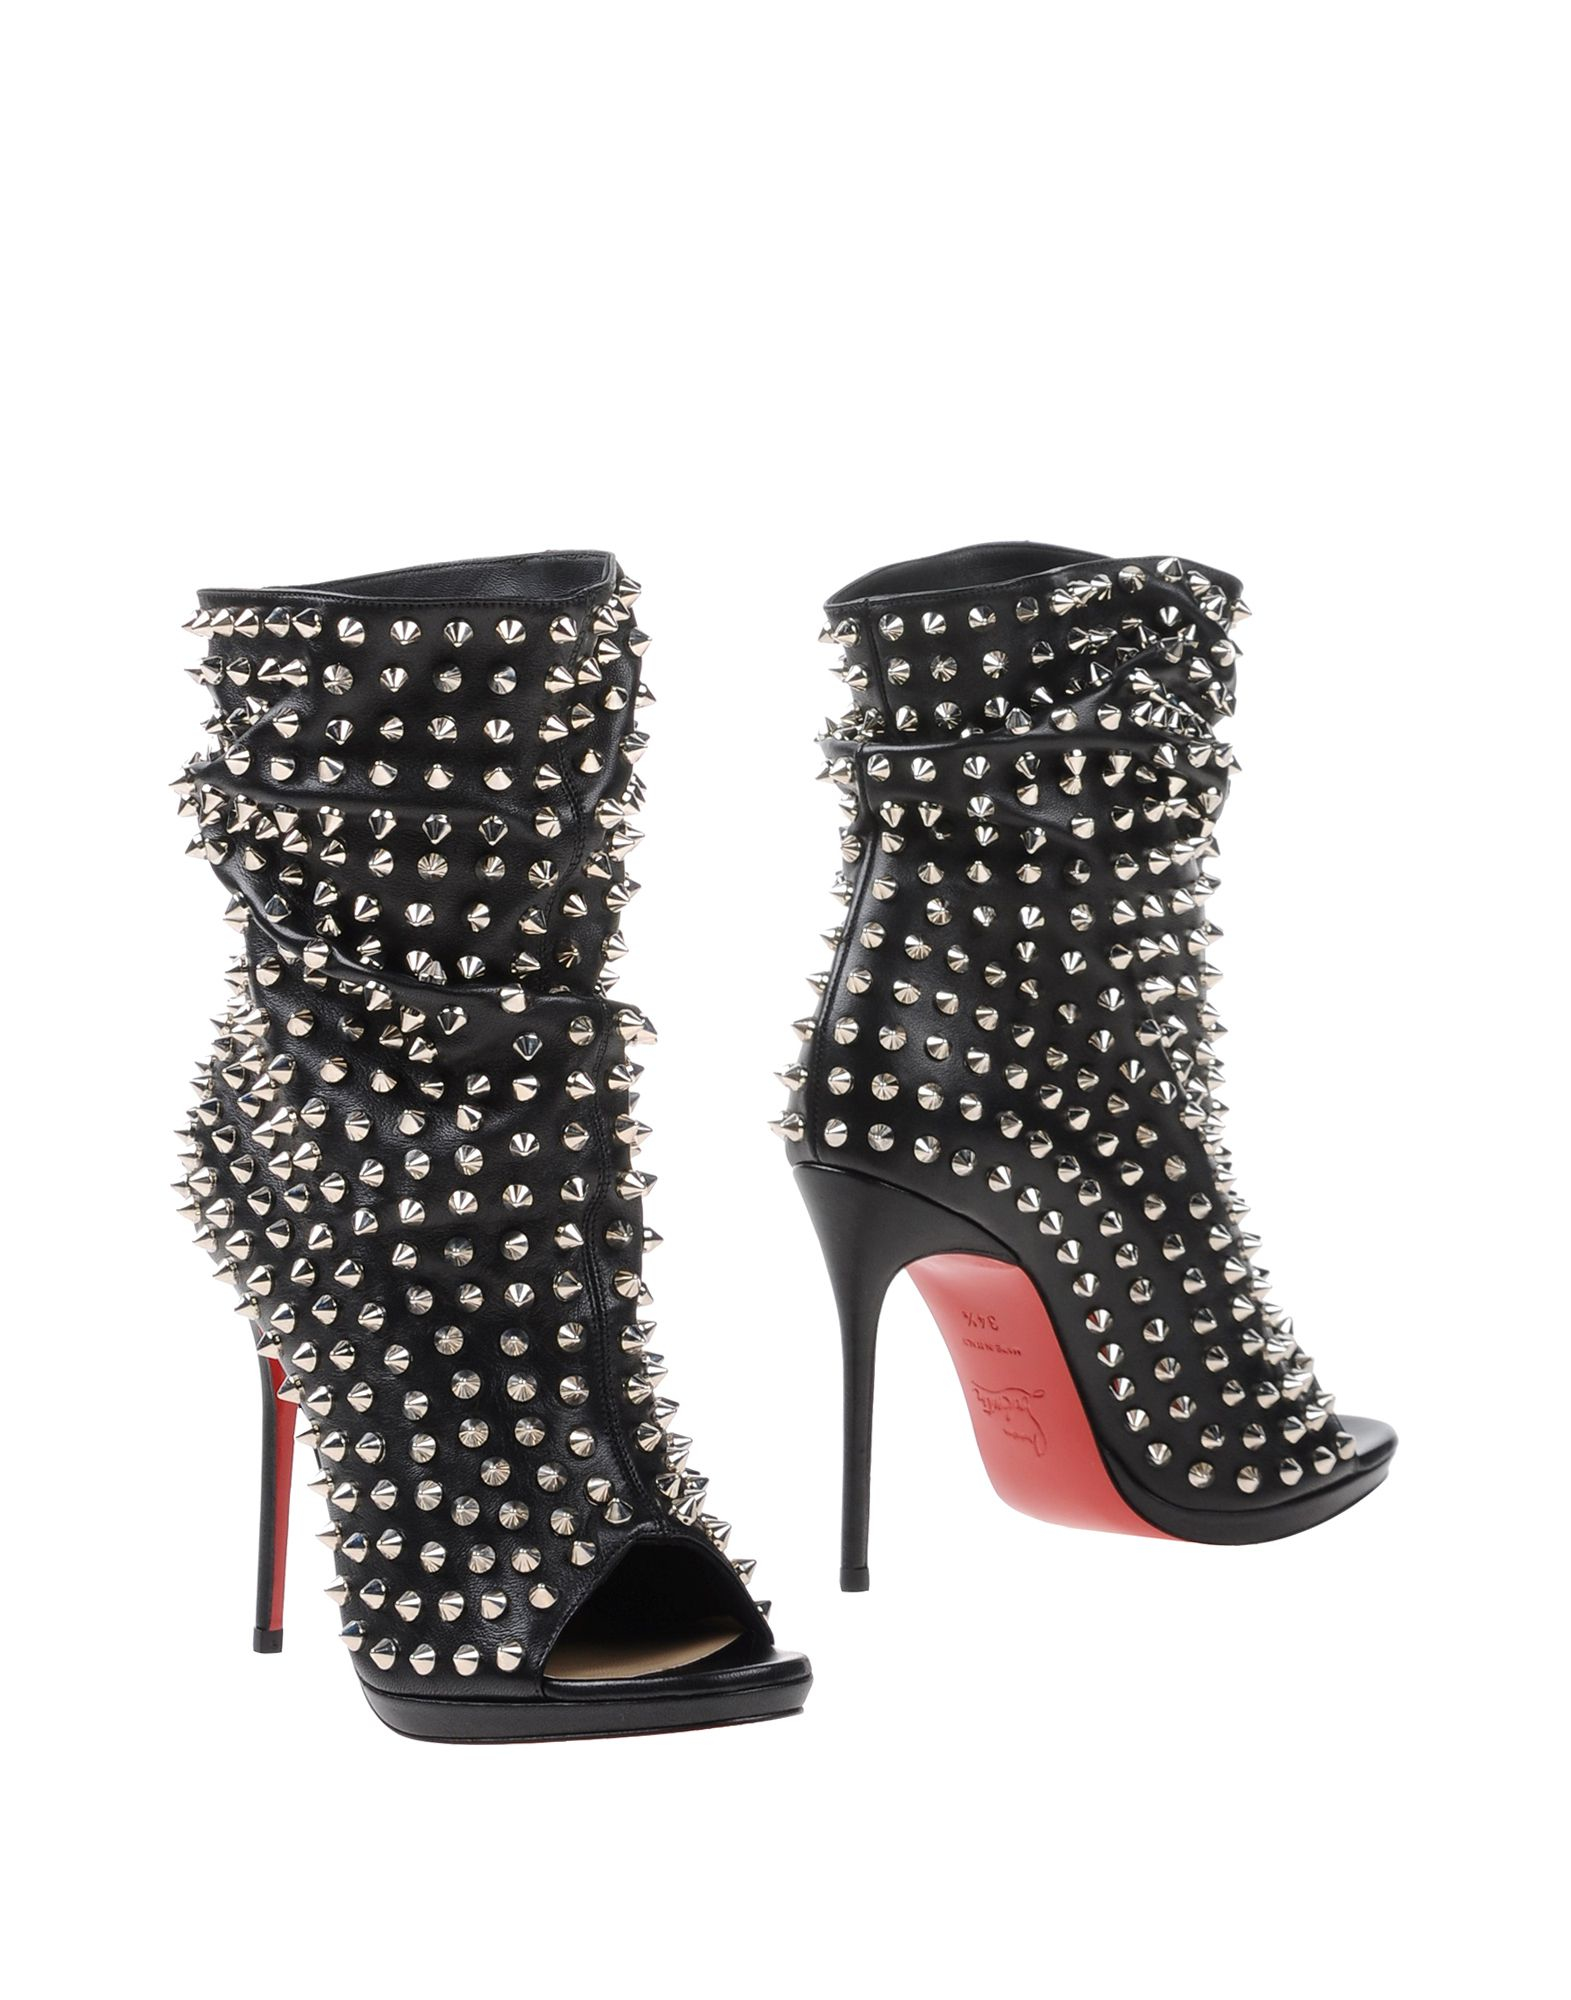 Christian Louboutin Leather Spike Wars Red Sole Ankle Bootie Version ...